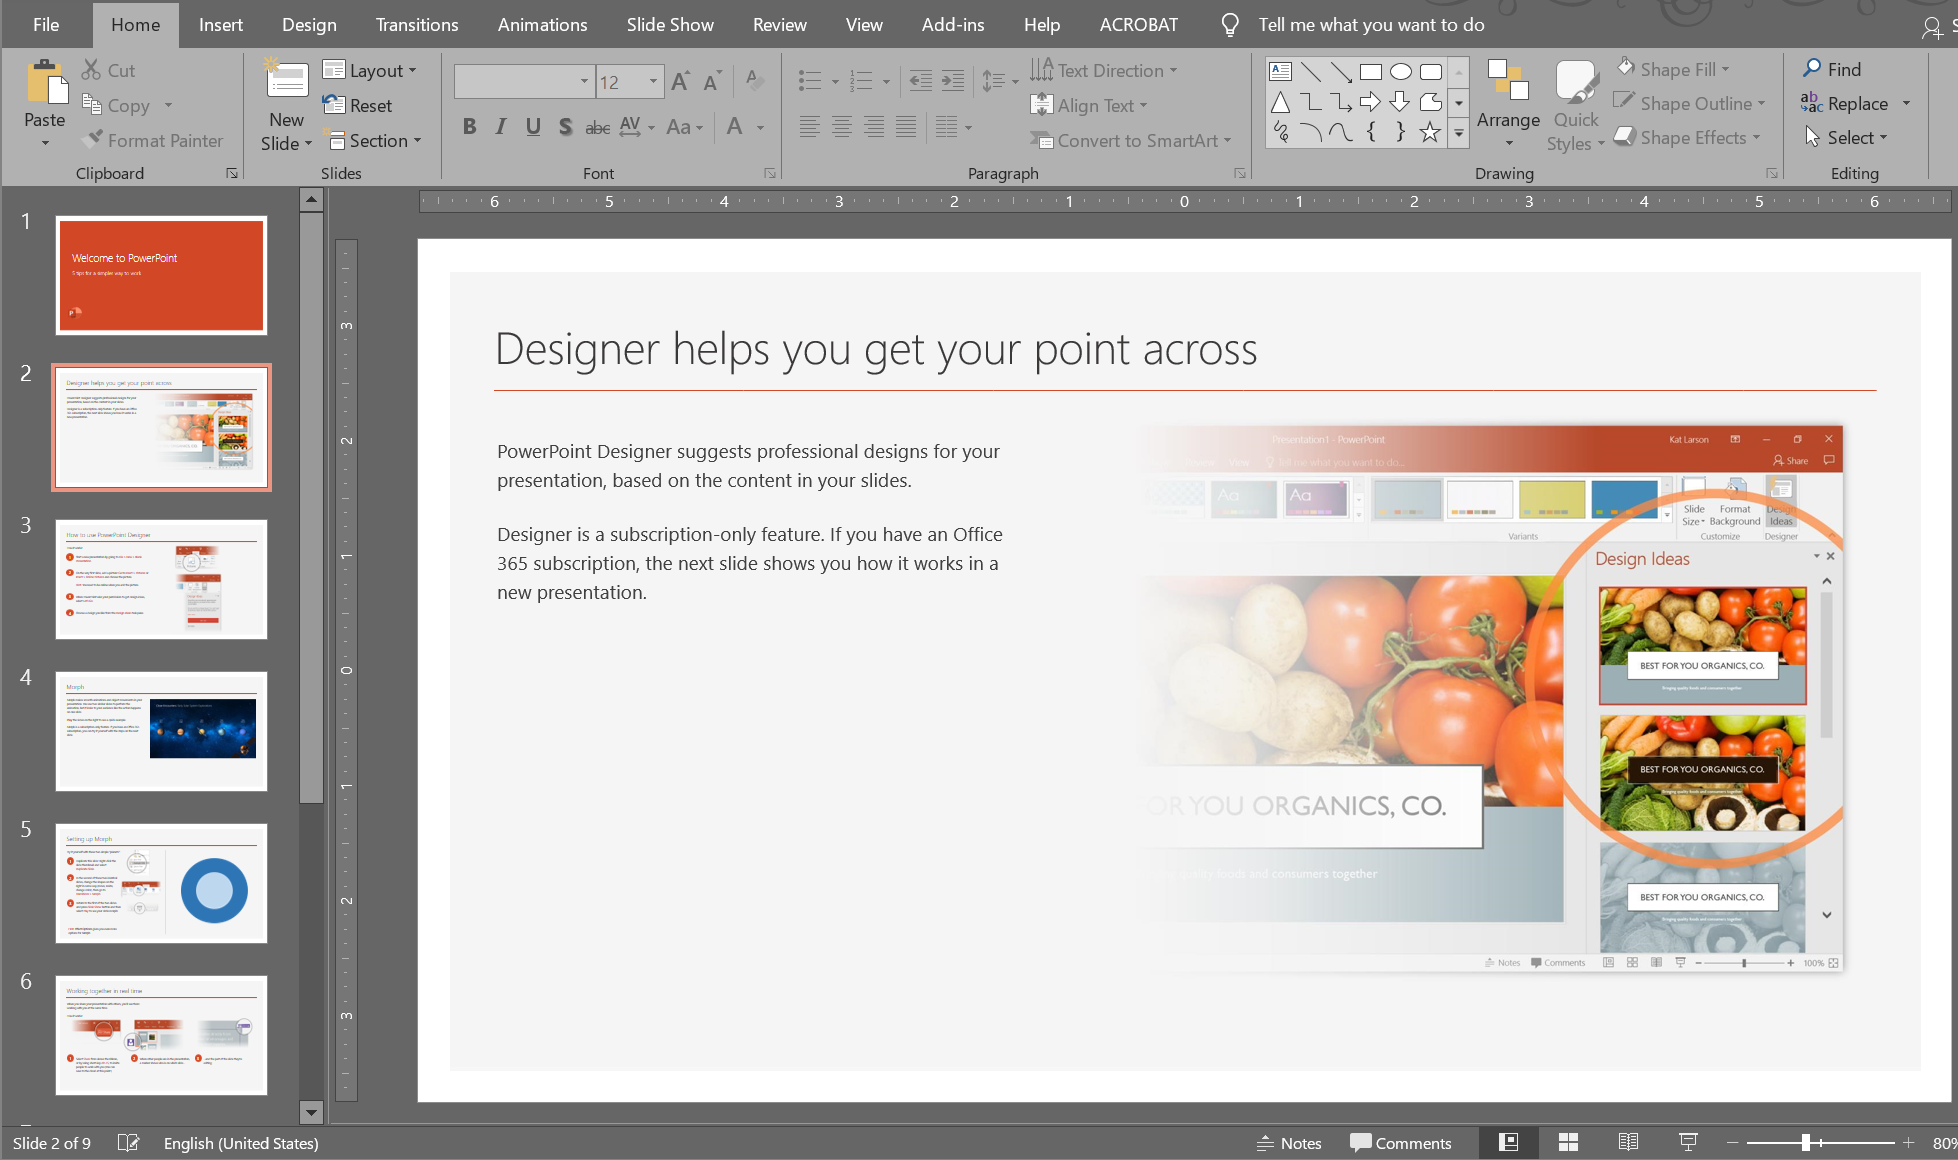 free pdf to powerpoint converter for mas